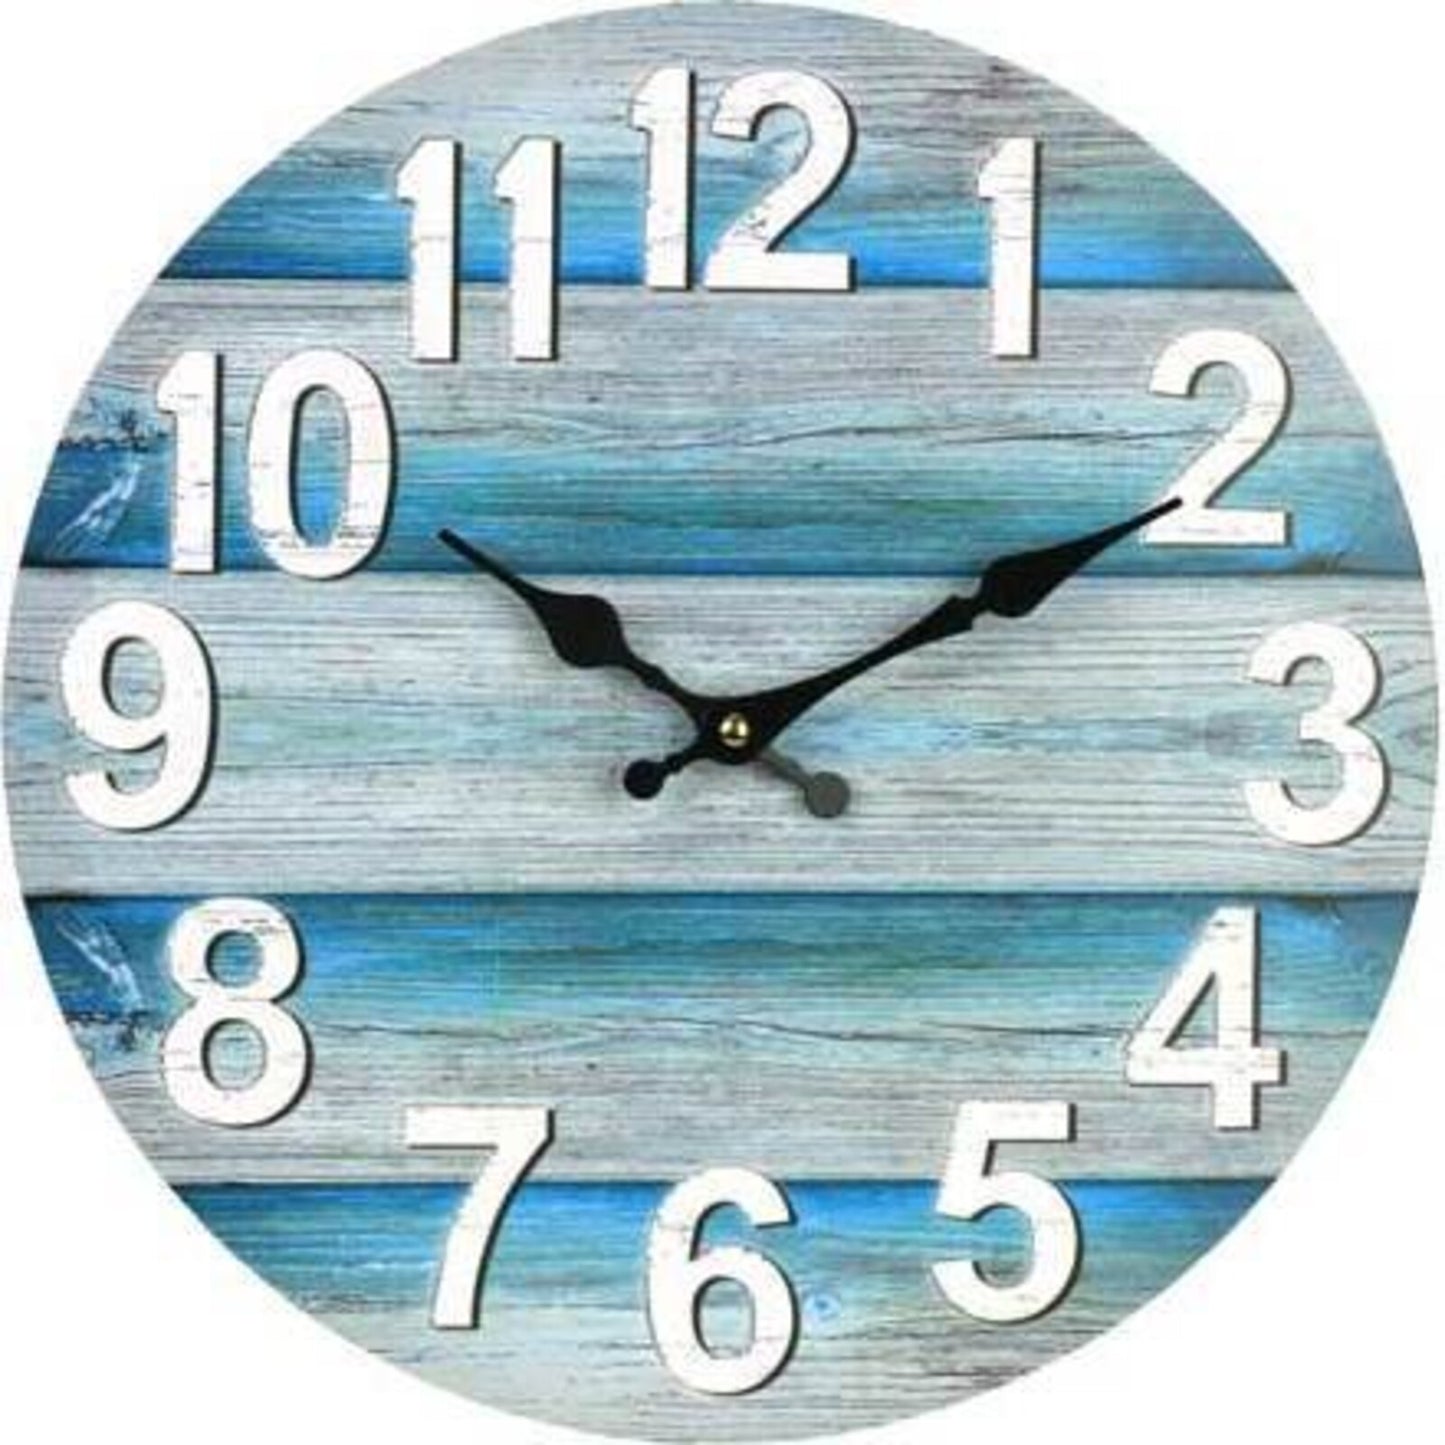 Clock Wall Rustic Beach Blue Teal Boards - The Renmy Store Homewares & Gifts 